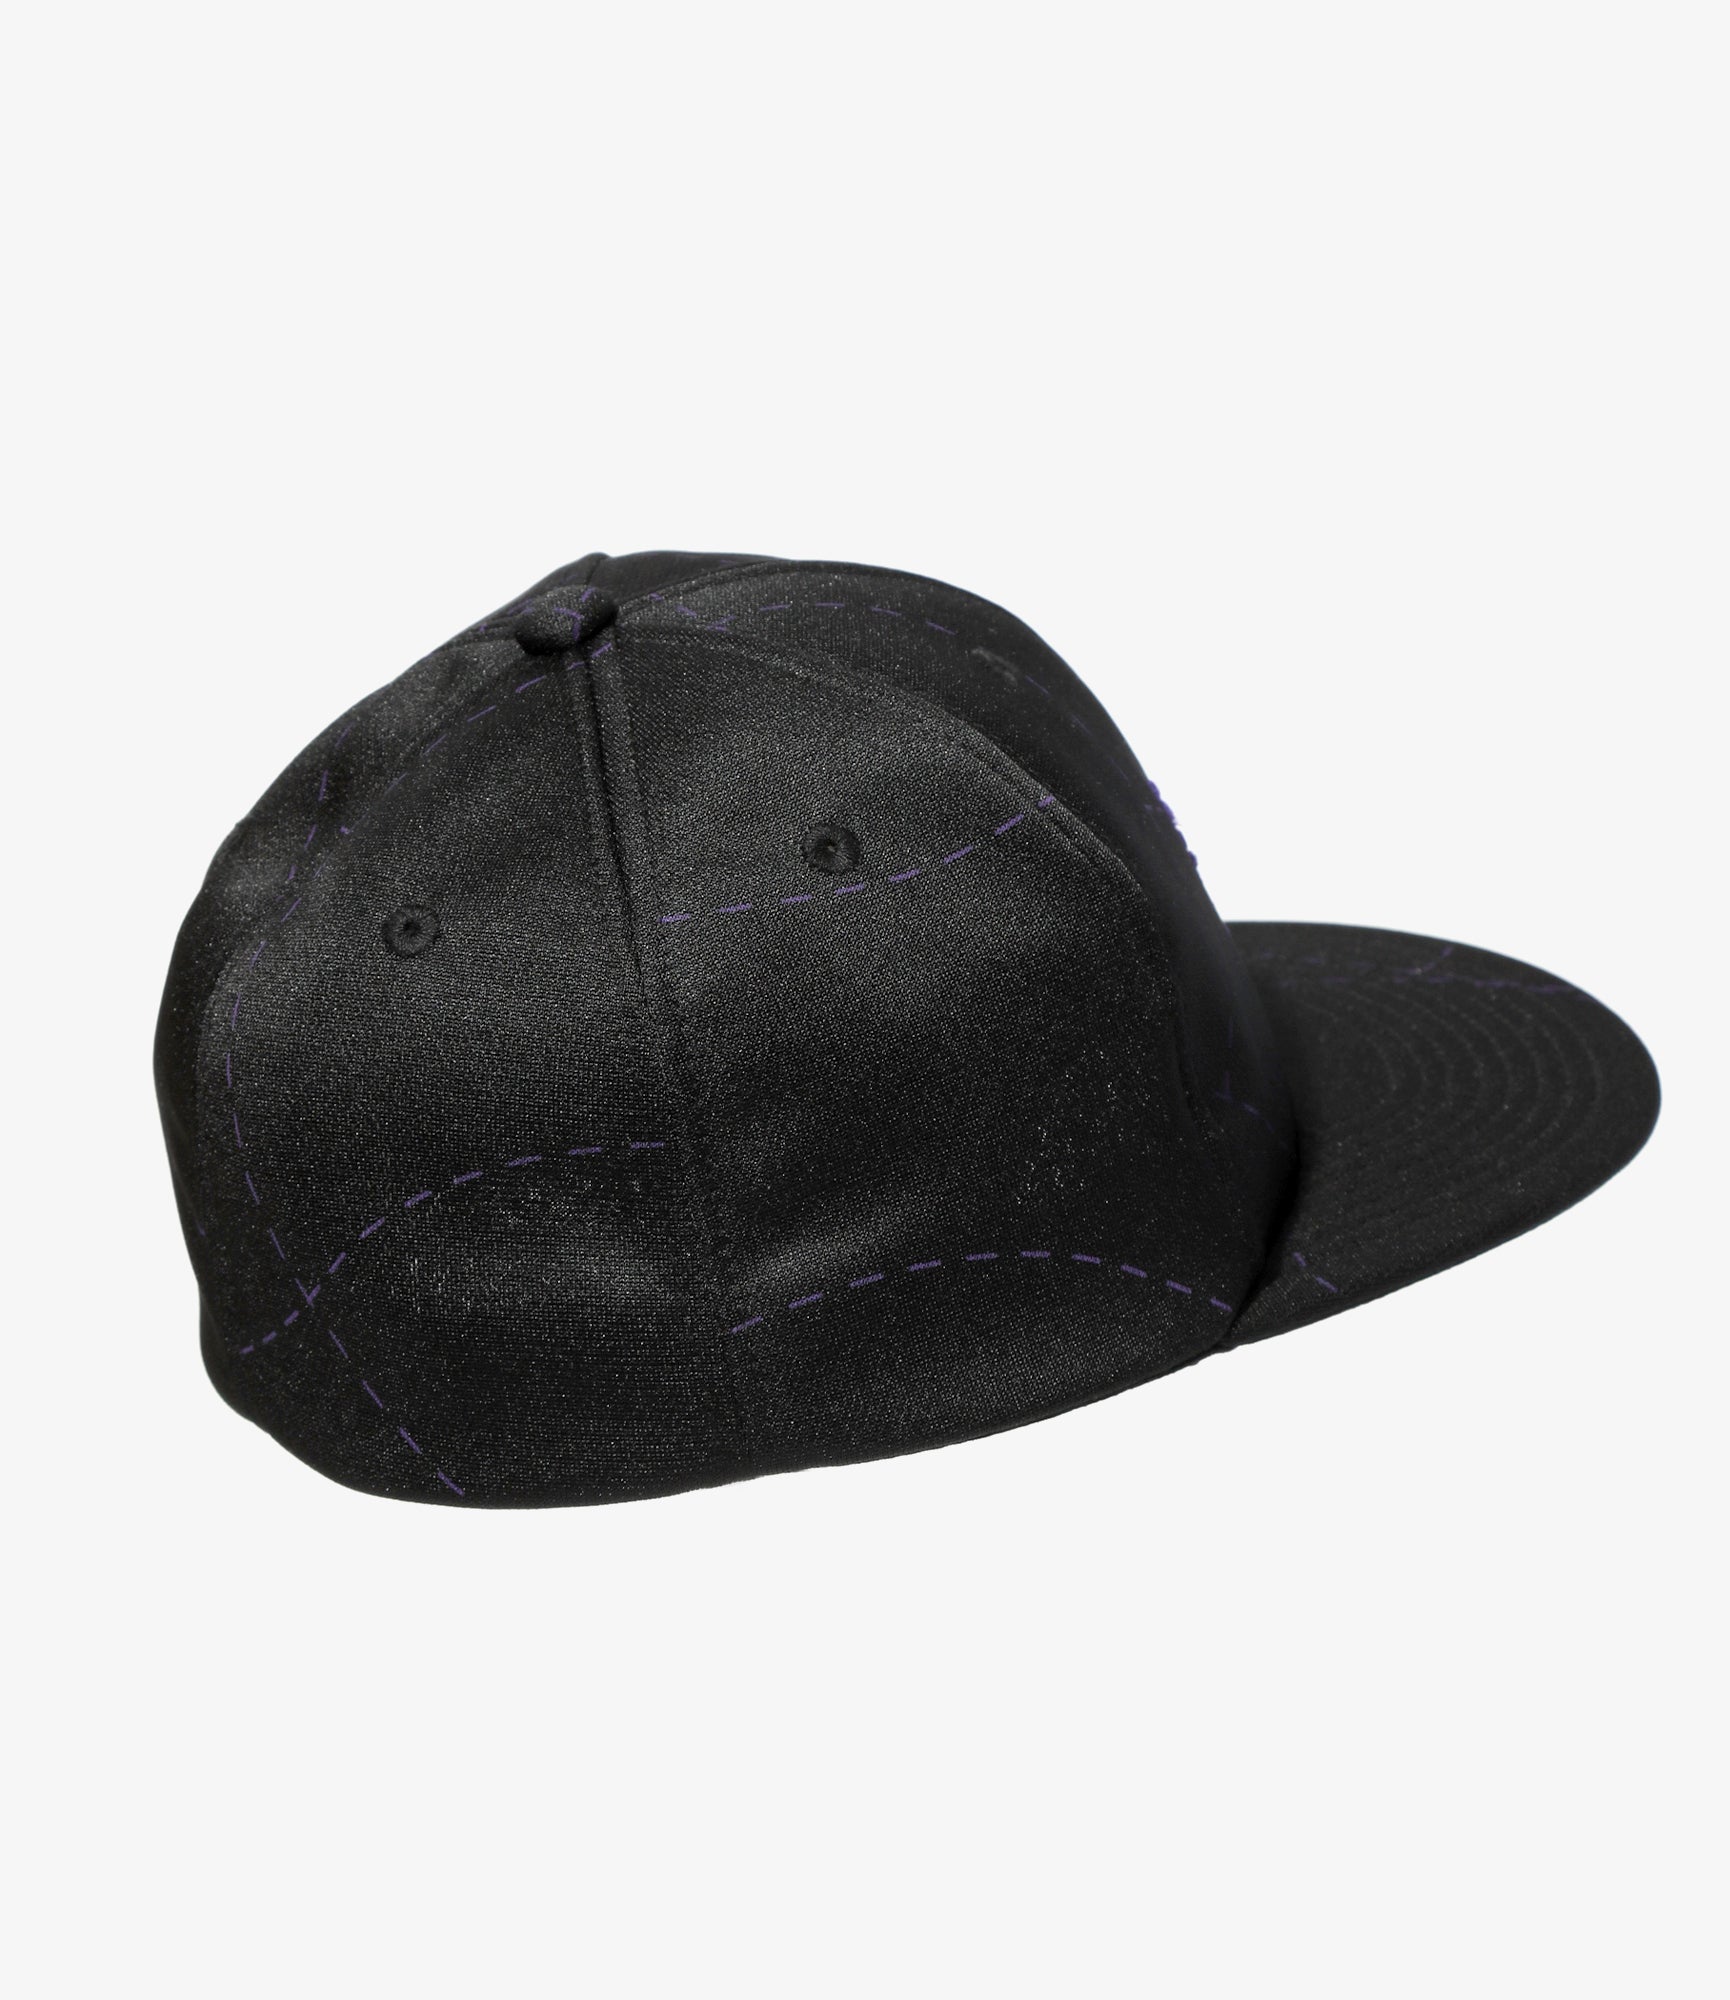 Needles x DC Shoes - Baseball Cap - Black - Poly Smooth / Printed |  Nepenthes New York